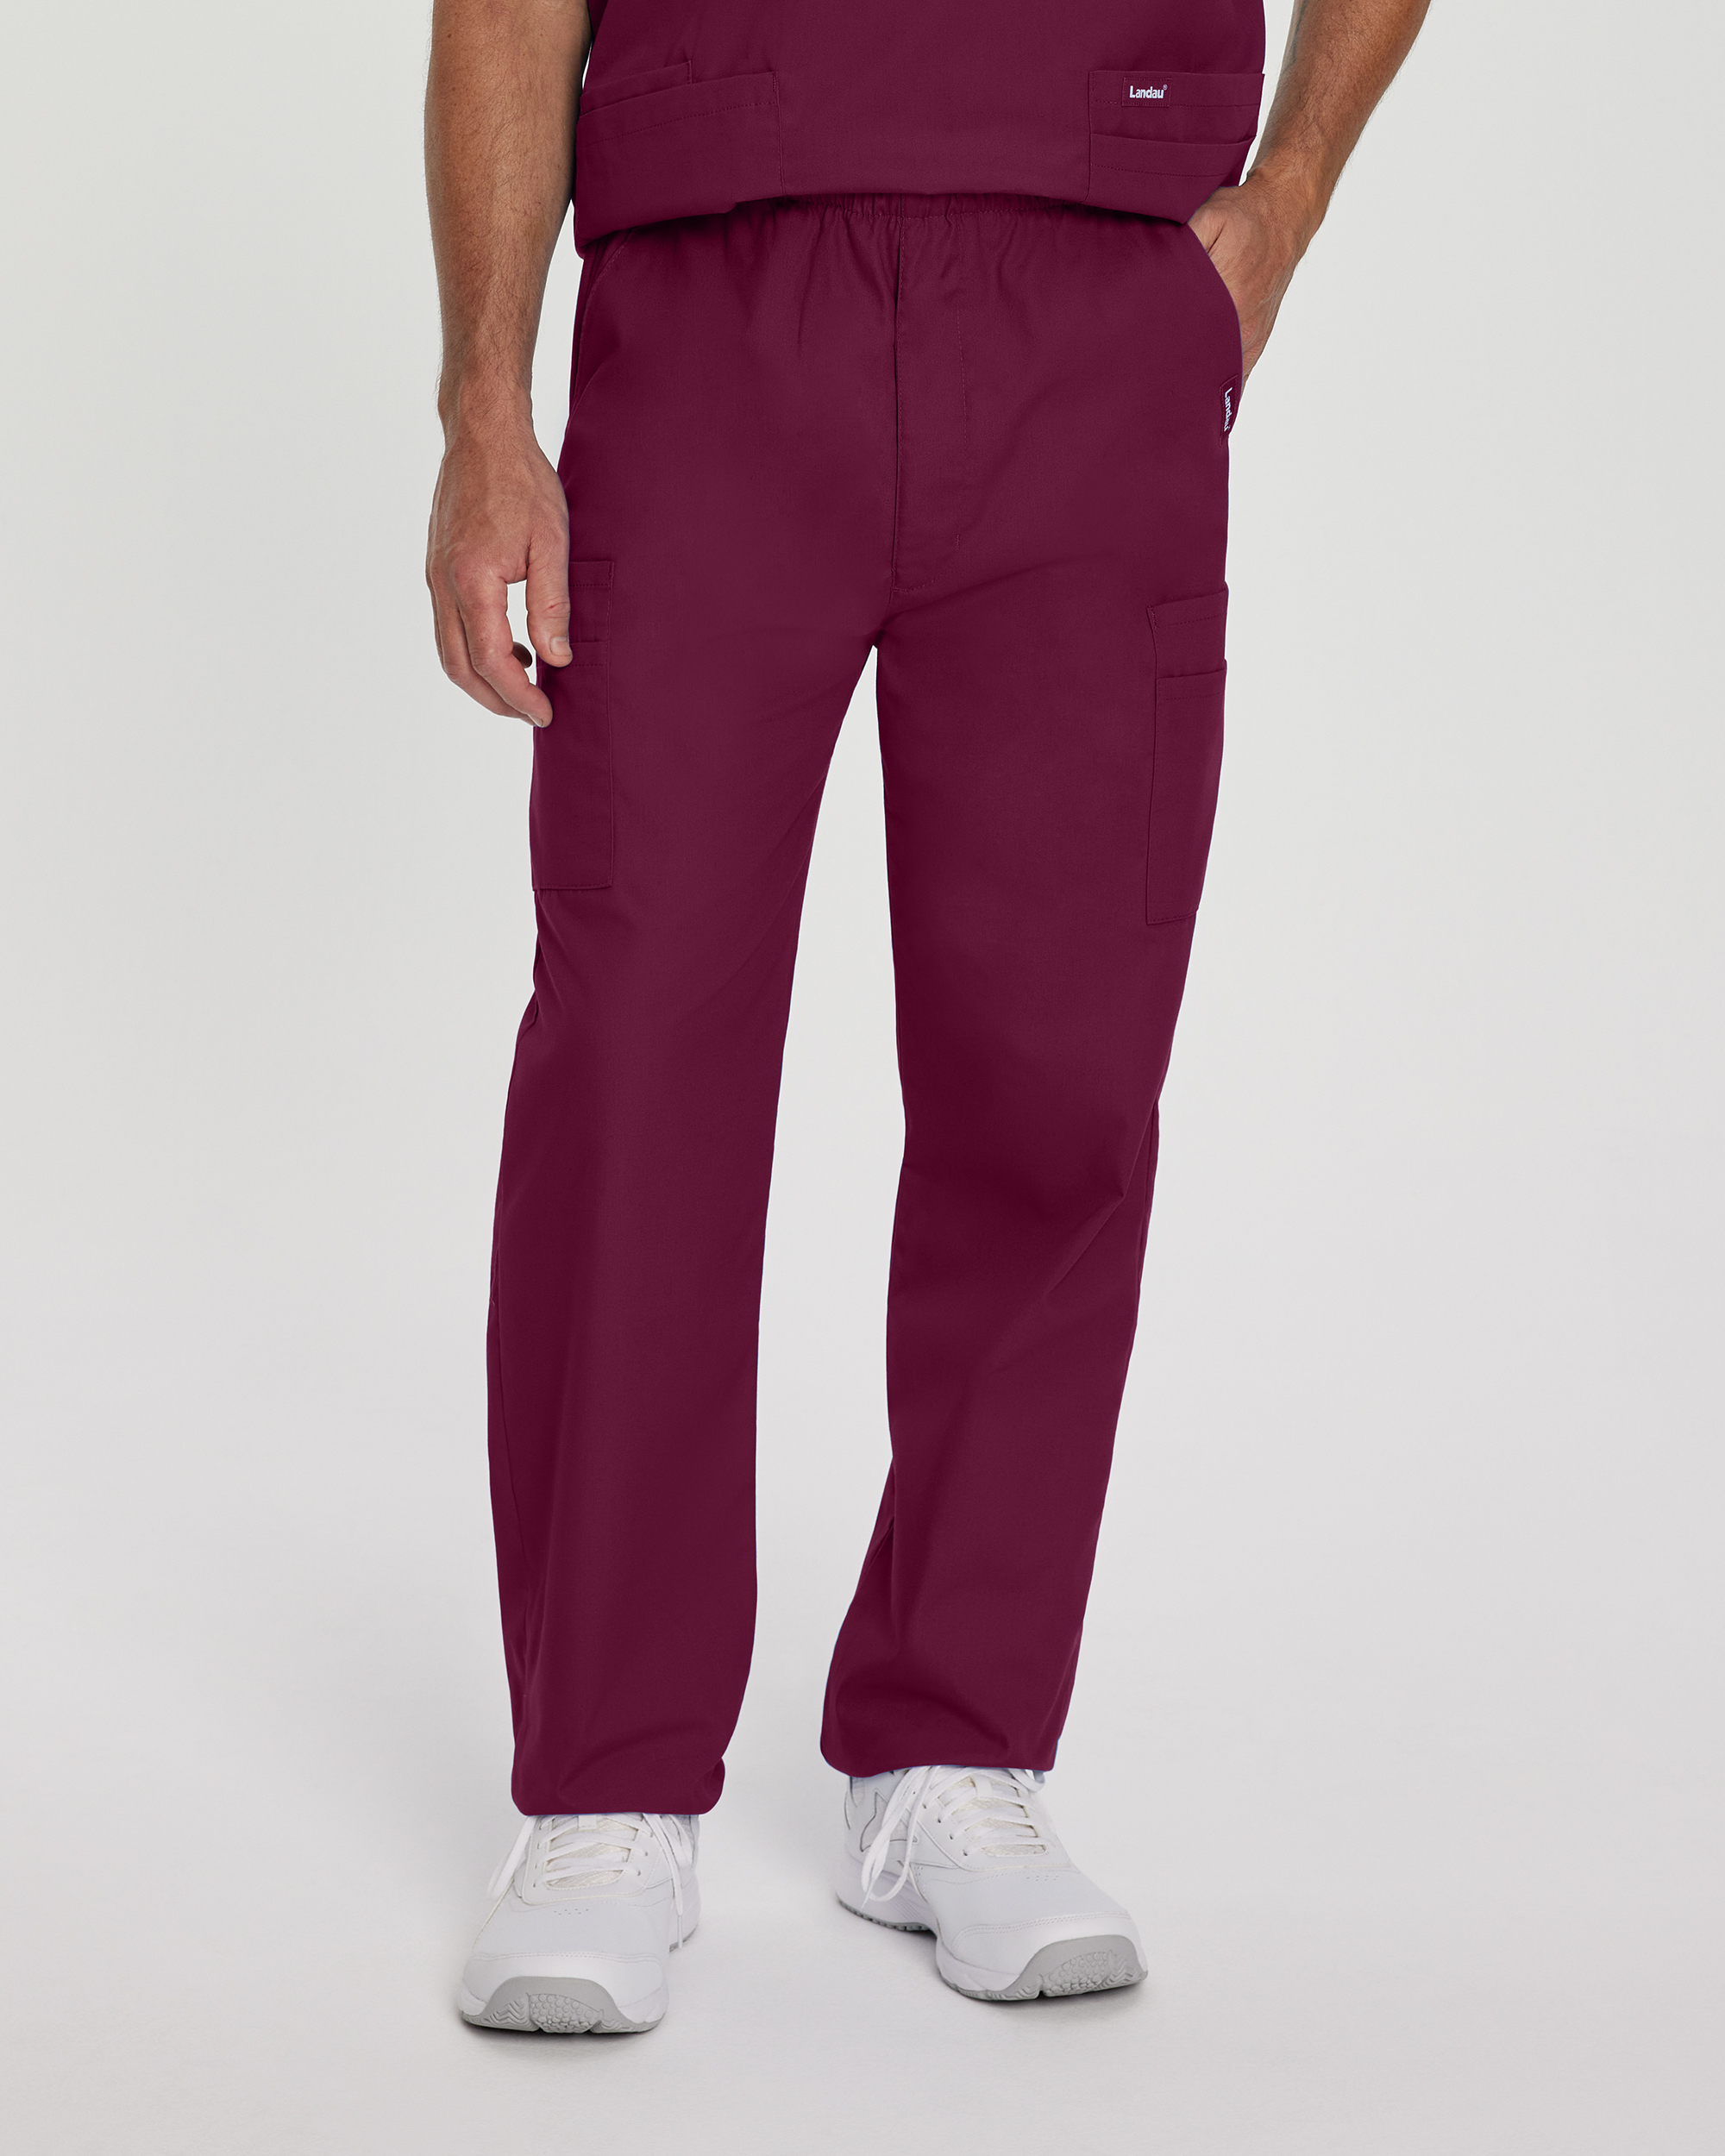 What material are these cargo scrub pants made of?